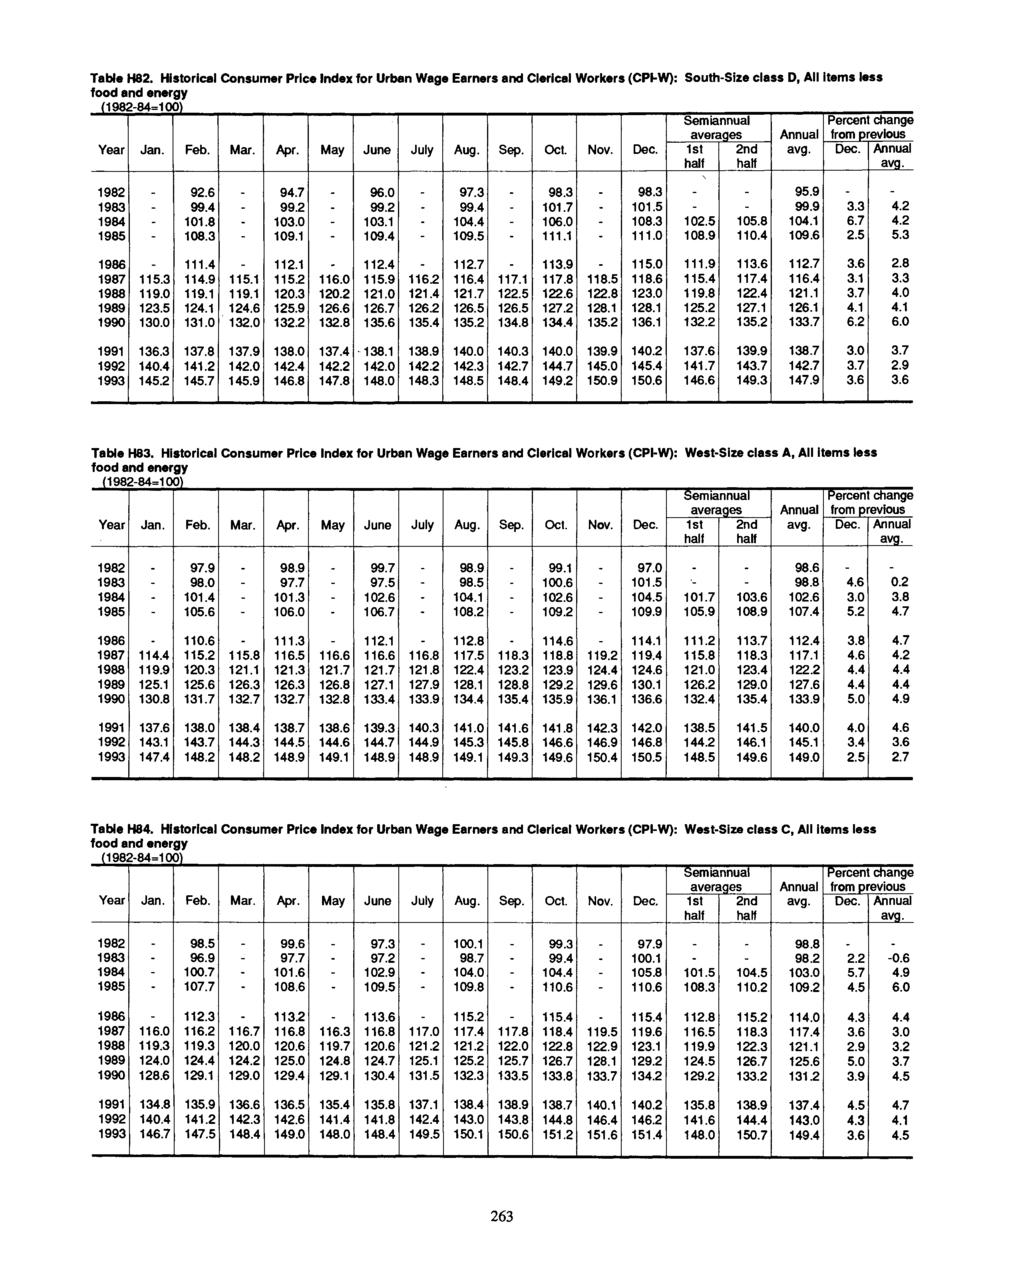 Table H82. Historical Consumer Price for Urban Wage Earners and Clerical Workers (CPI-W): South-Size class D, All items less food and energy (1982-84=100) Year Feb. Mar. Apr. May June July Aug. Sep.